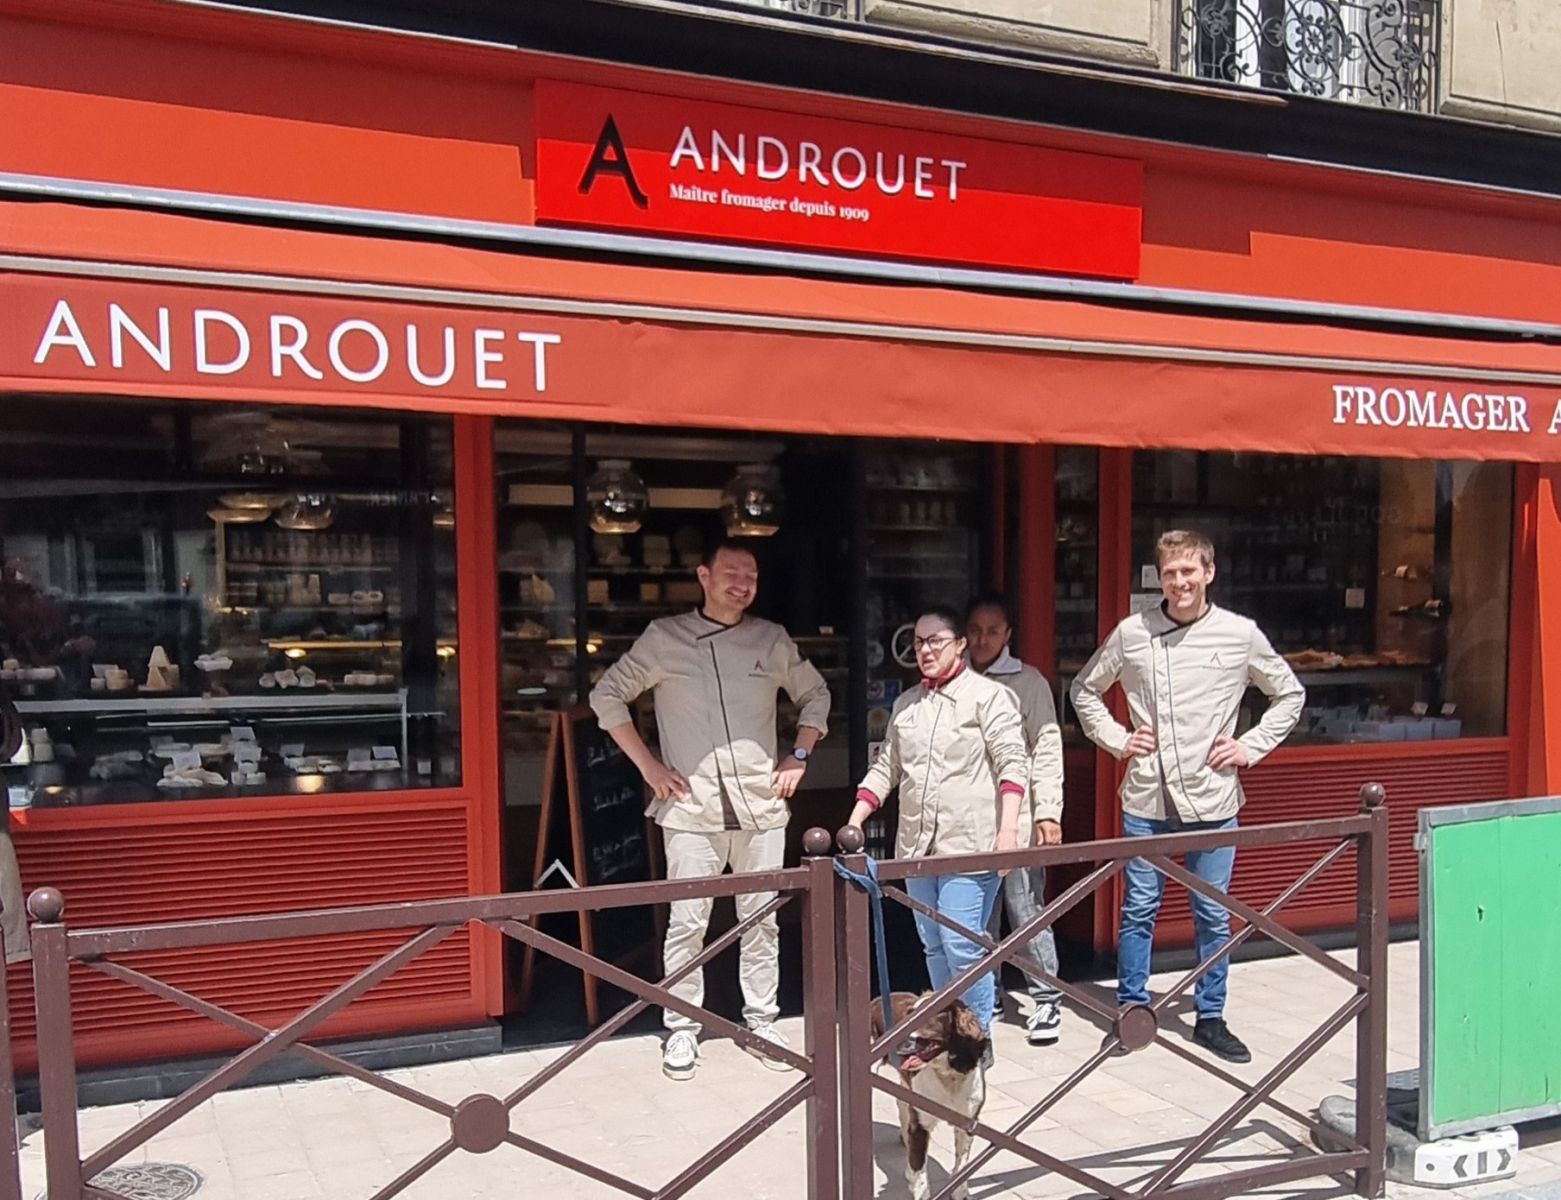 Androuet is now rue du Château in Neuilly